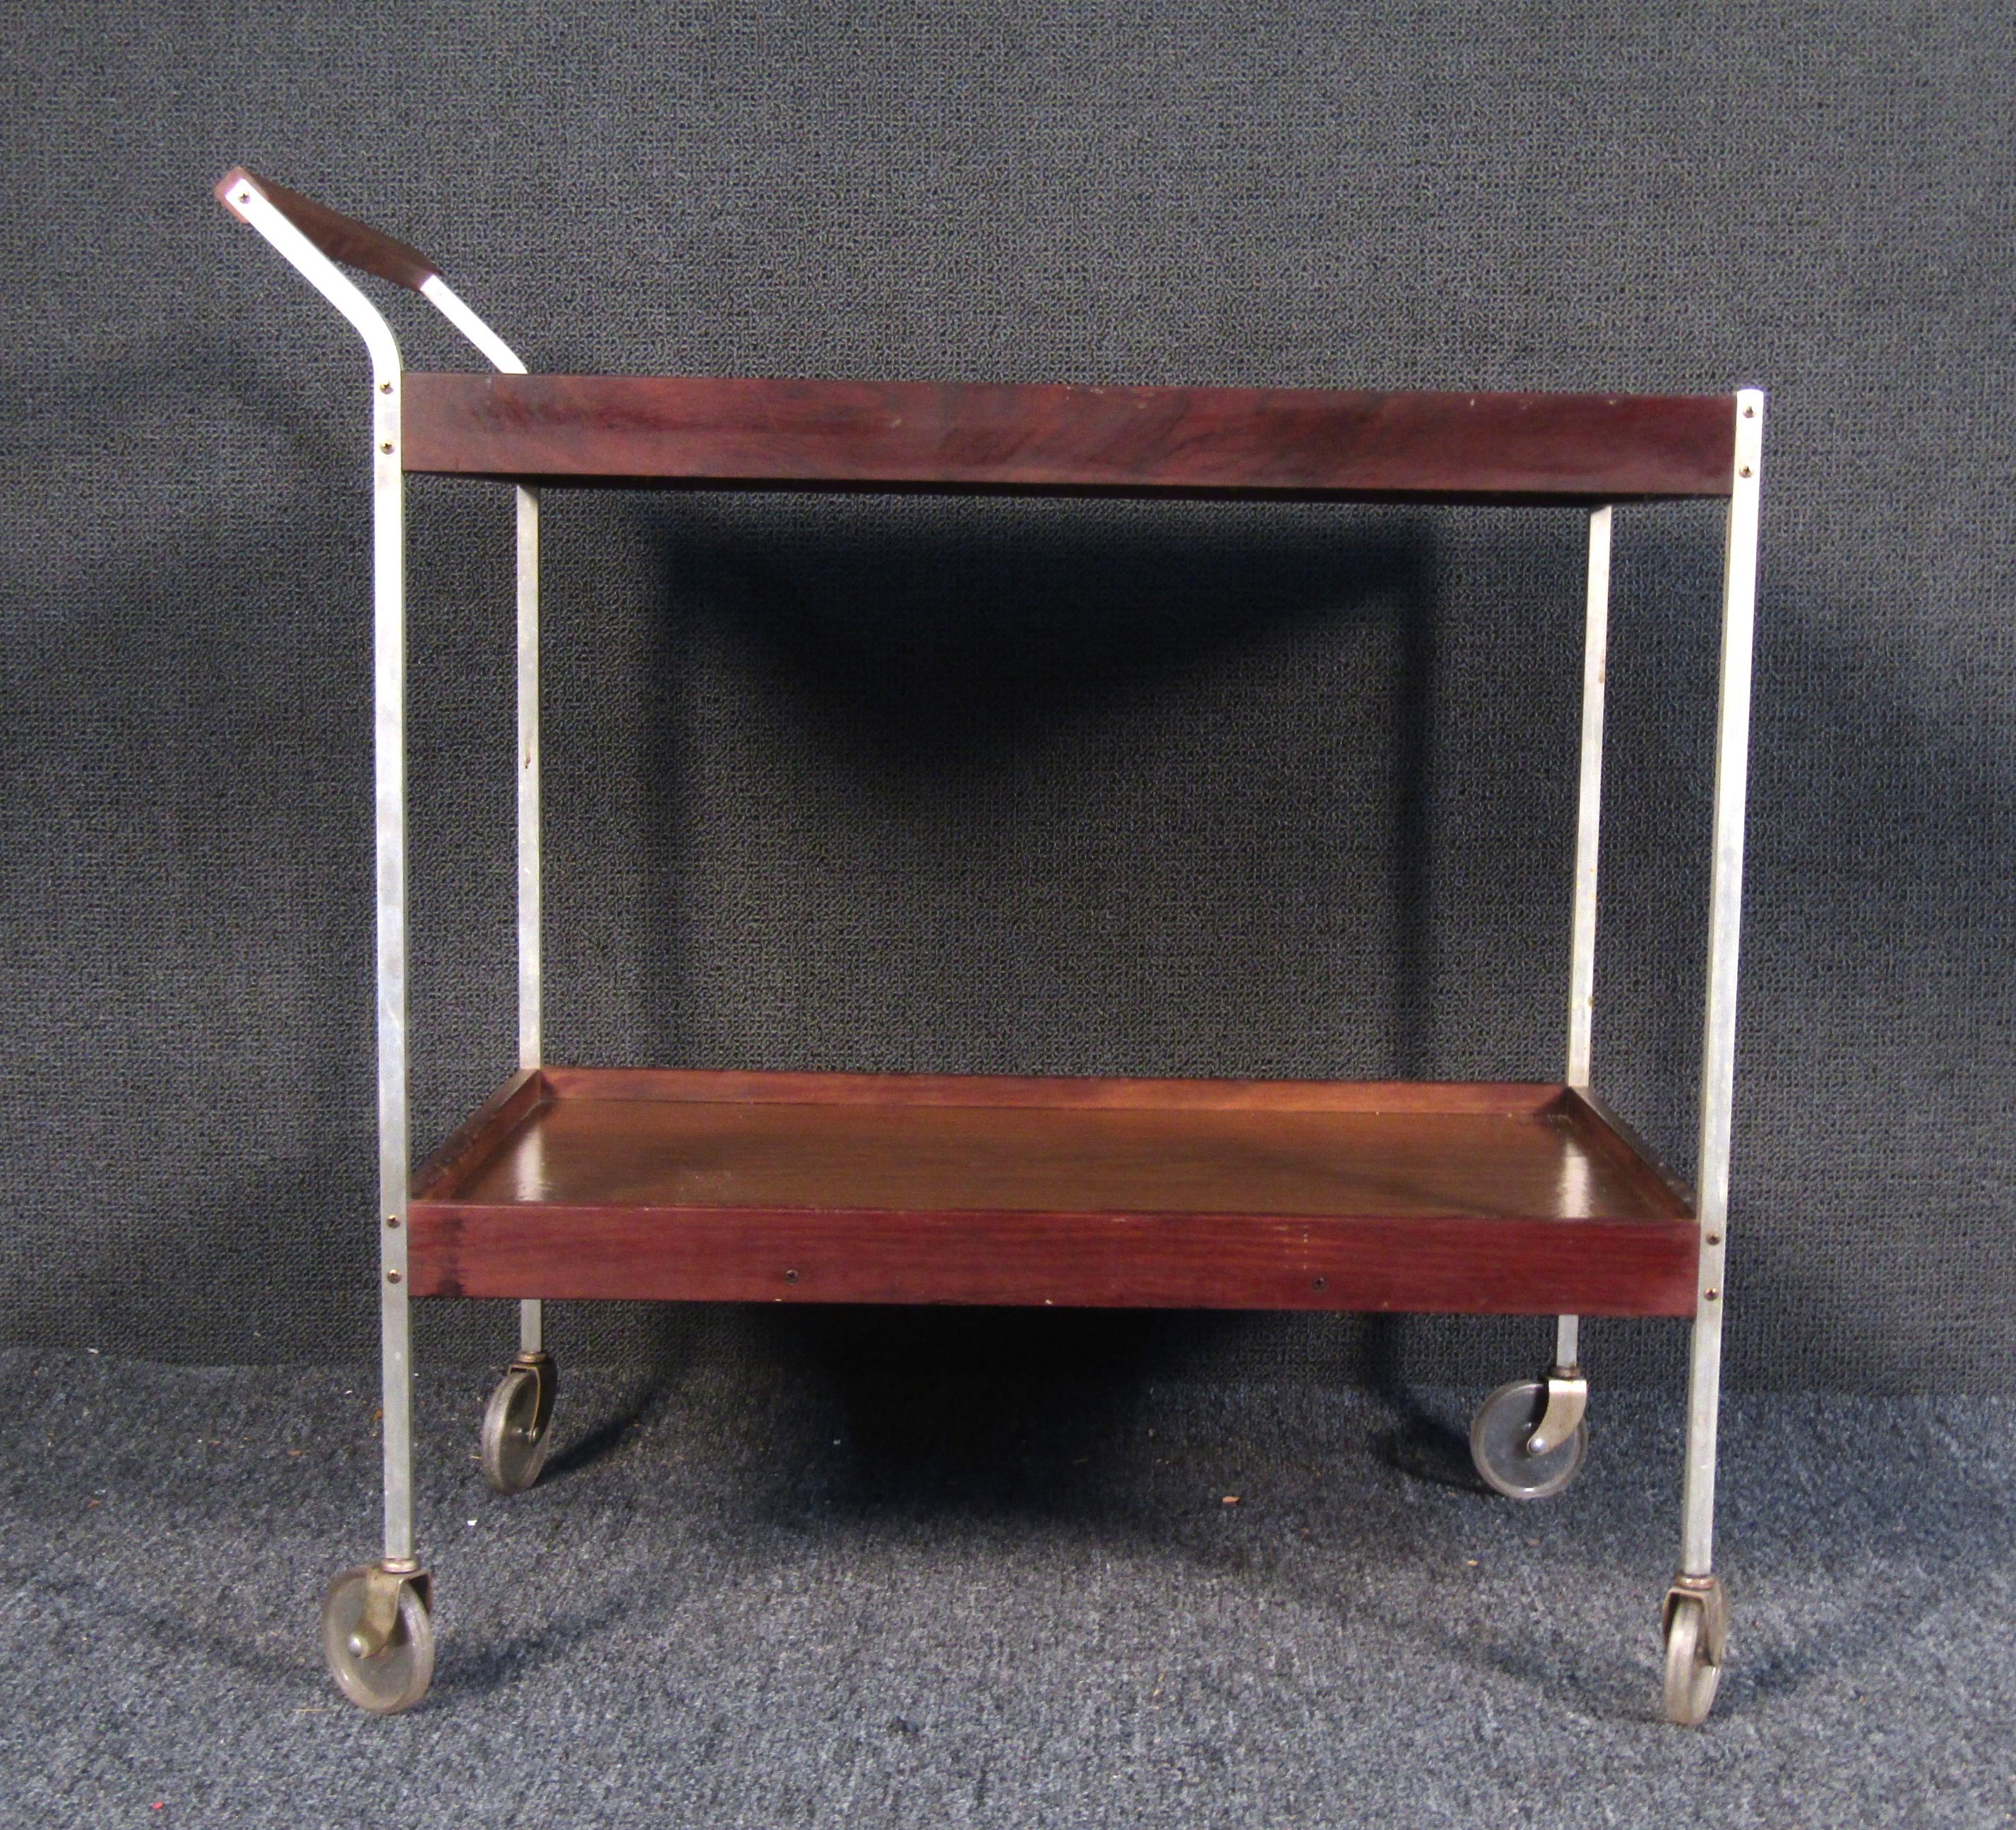 Vintage modern buffet cart with hot glass. This sleek Salton cart features two tiers and has four wheels. Perfect for serving food at your weekend brunch parties.

Please confirm item location (NY or NJ).